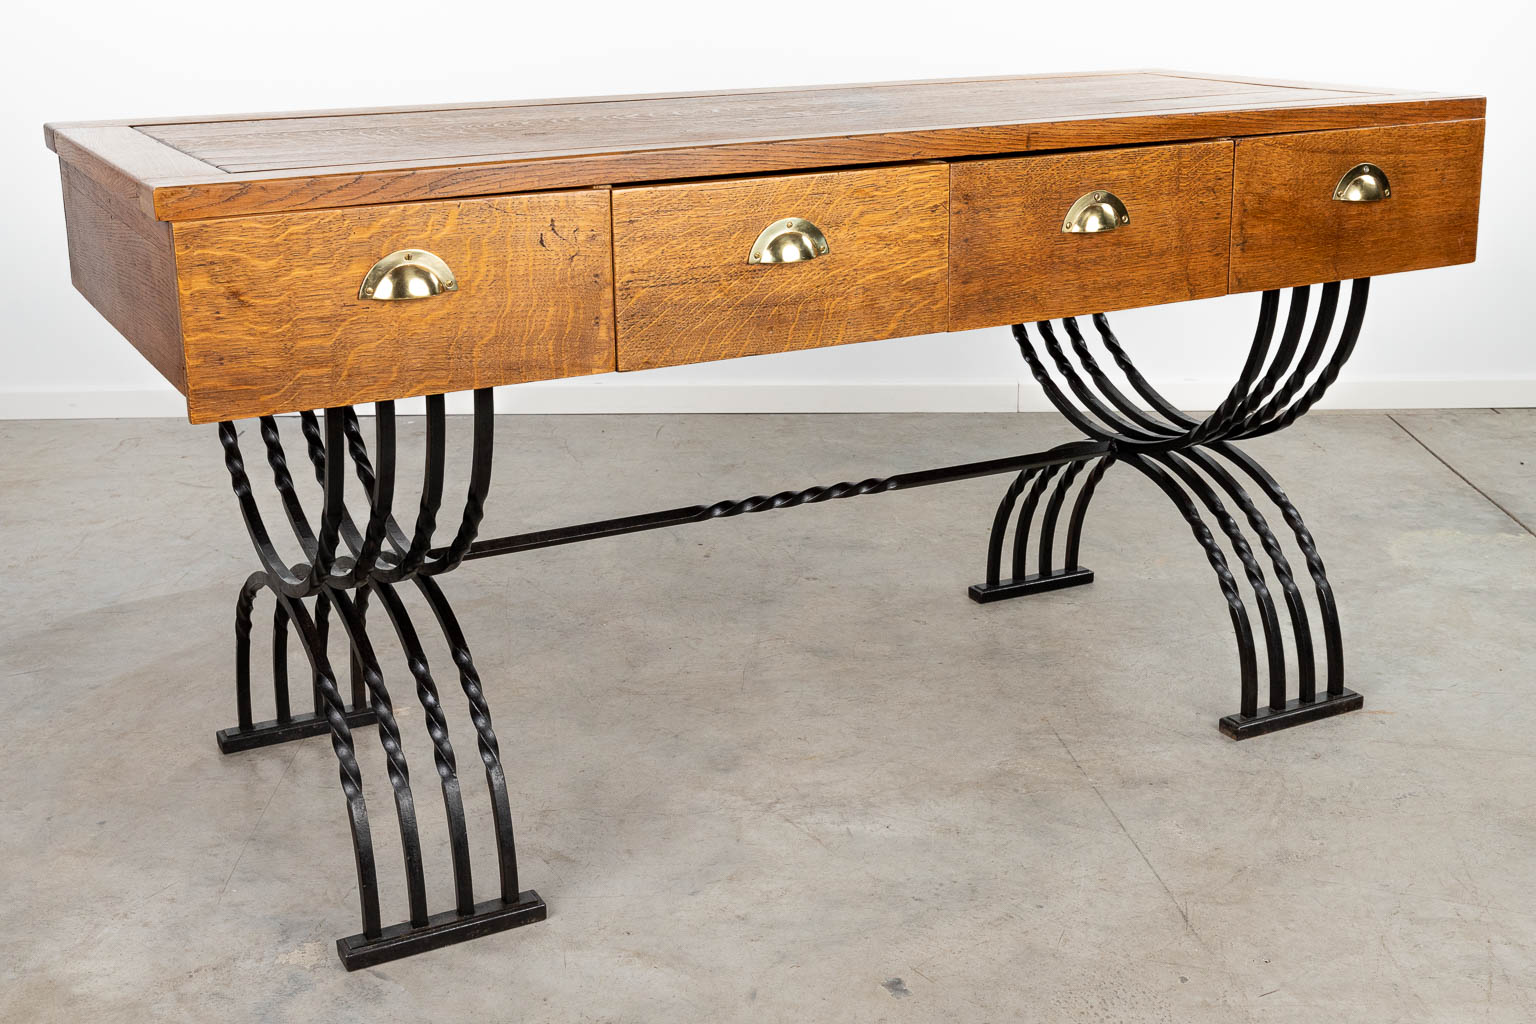 A shop counter made of wrought iron and wood. Used in the Paris Londres in Bruges. (H:85cm)